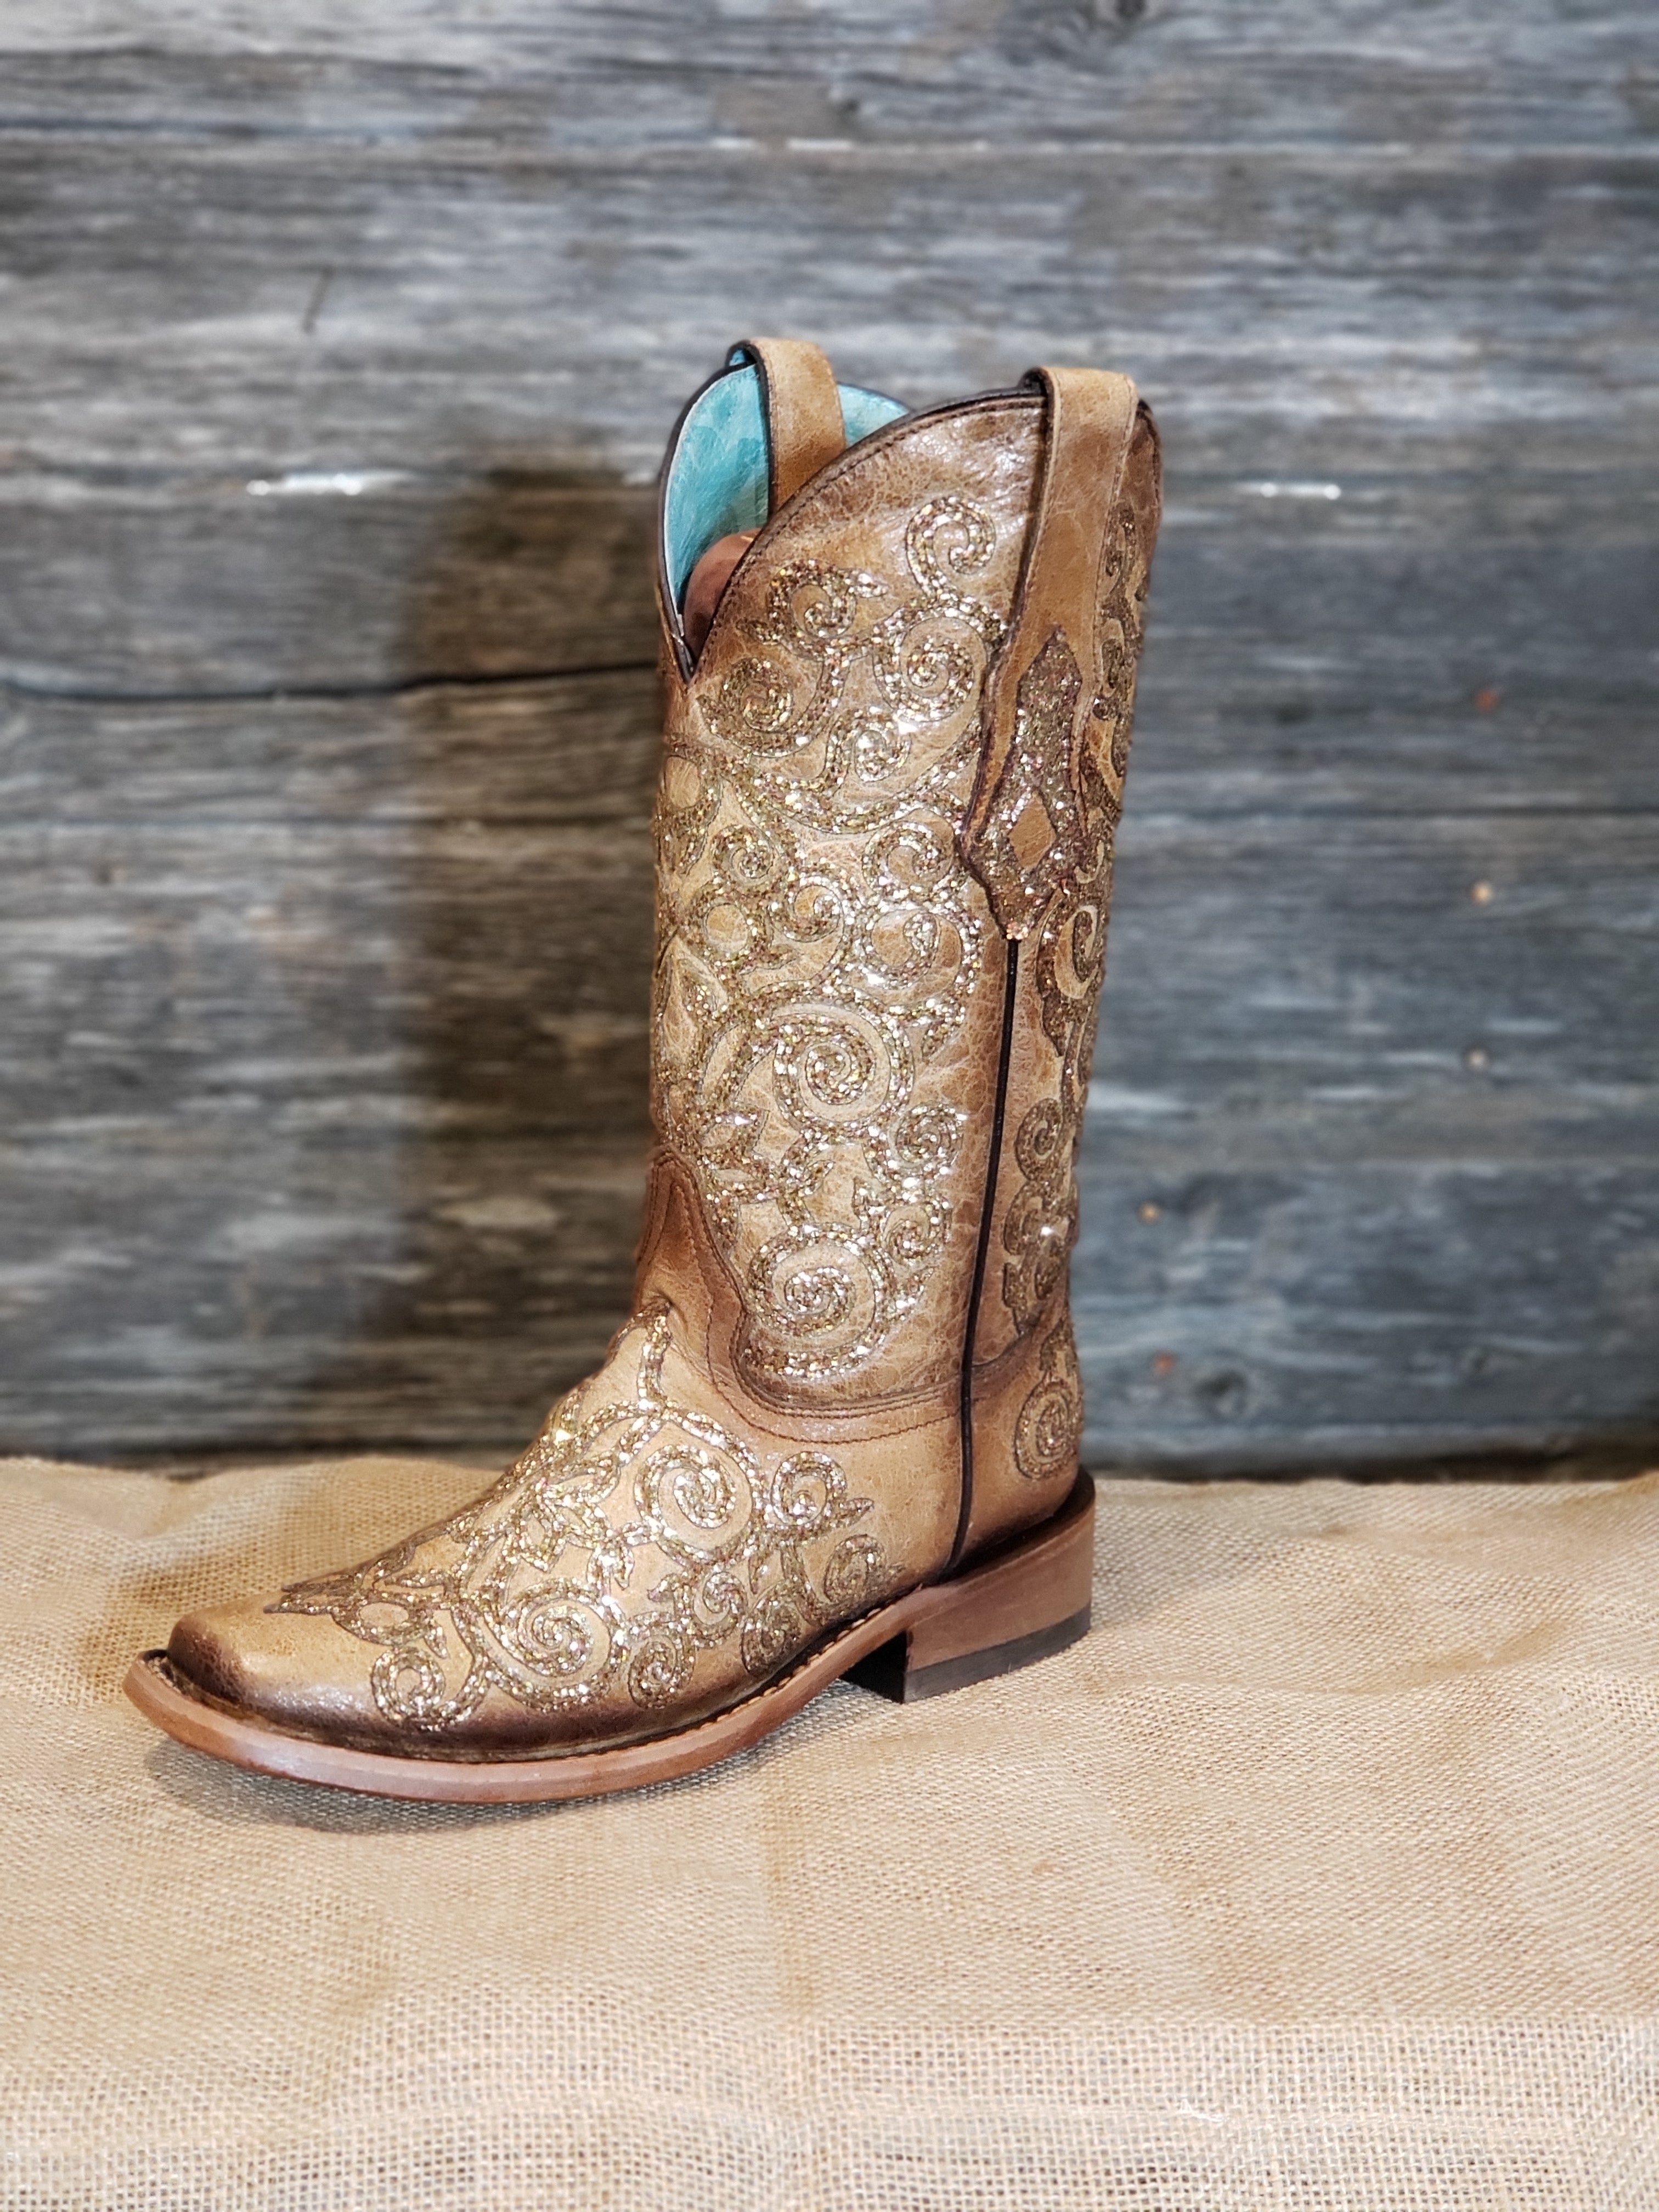 Corral Saddle Gold Glitter Overlay Embroidery Square Toe Boot C3772